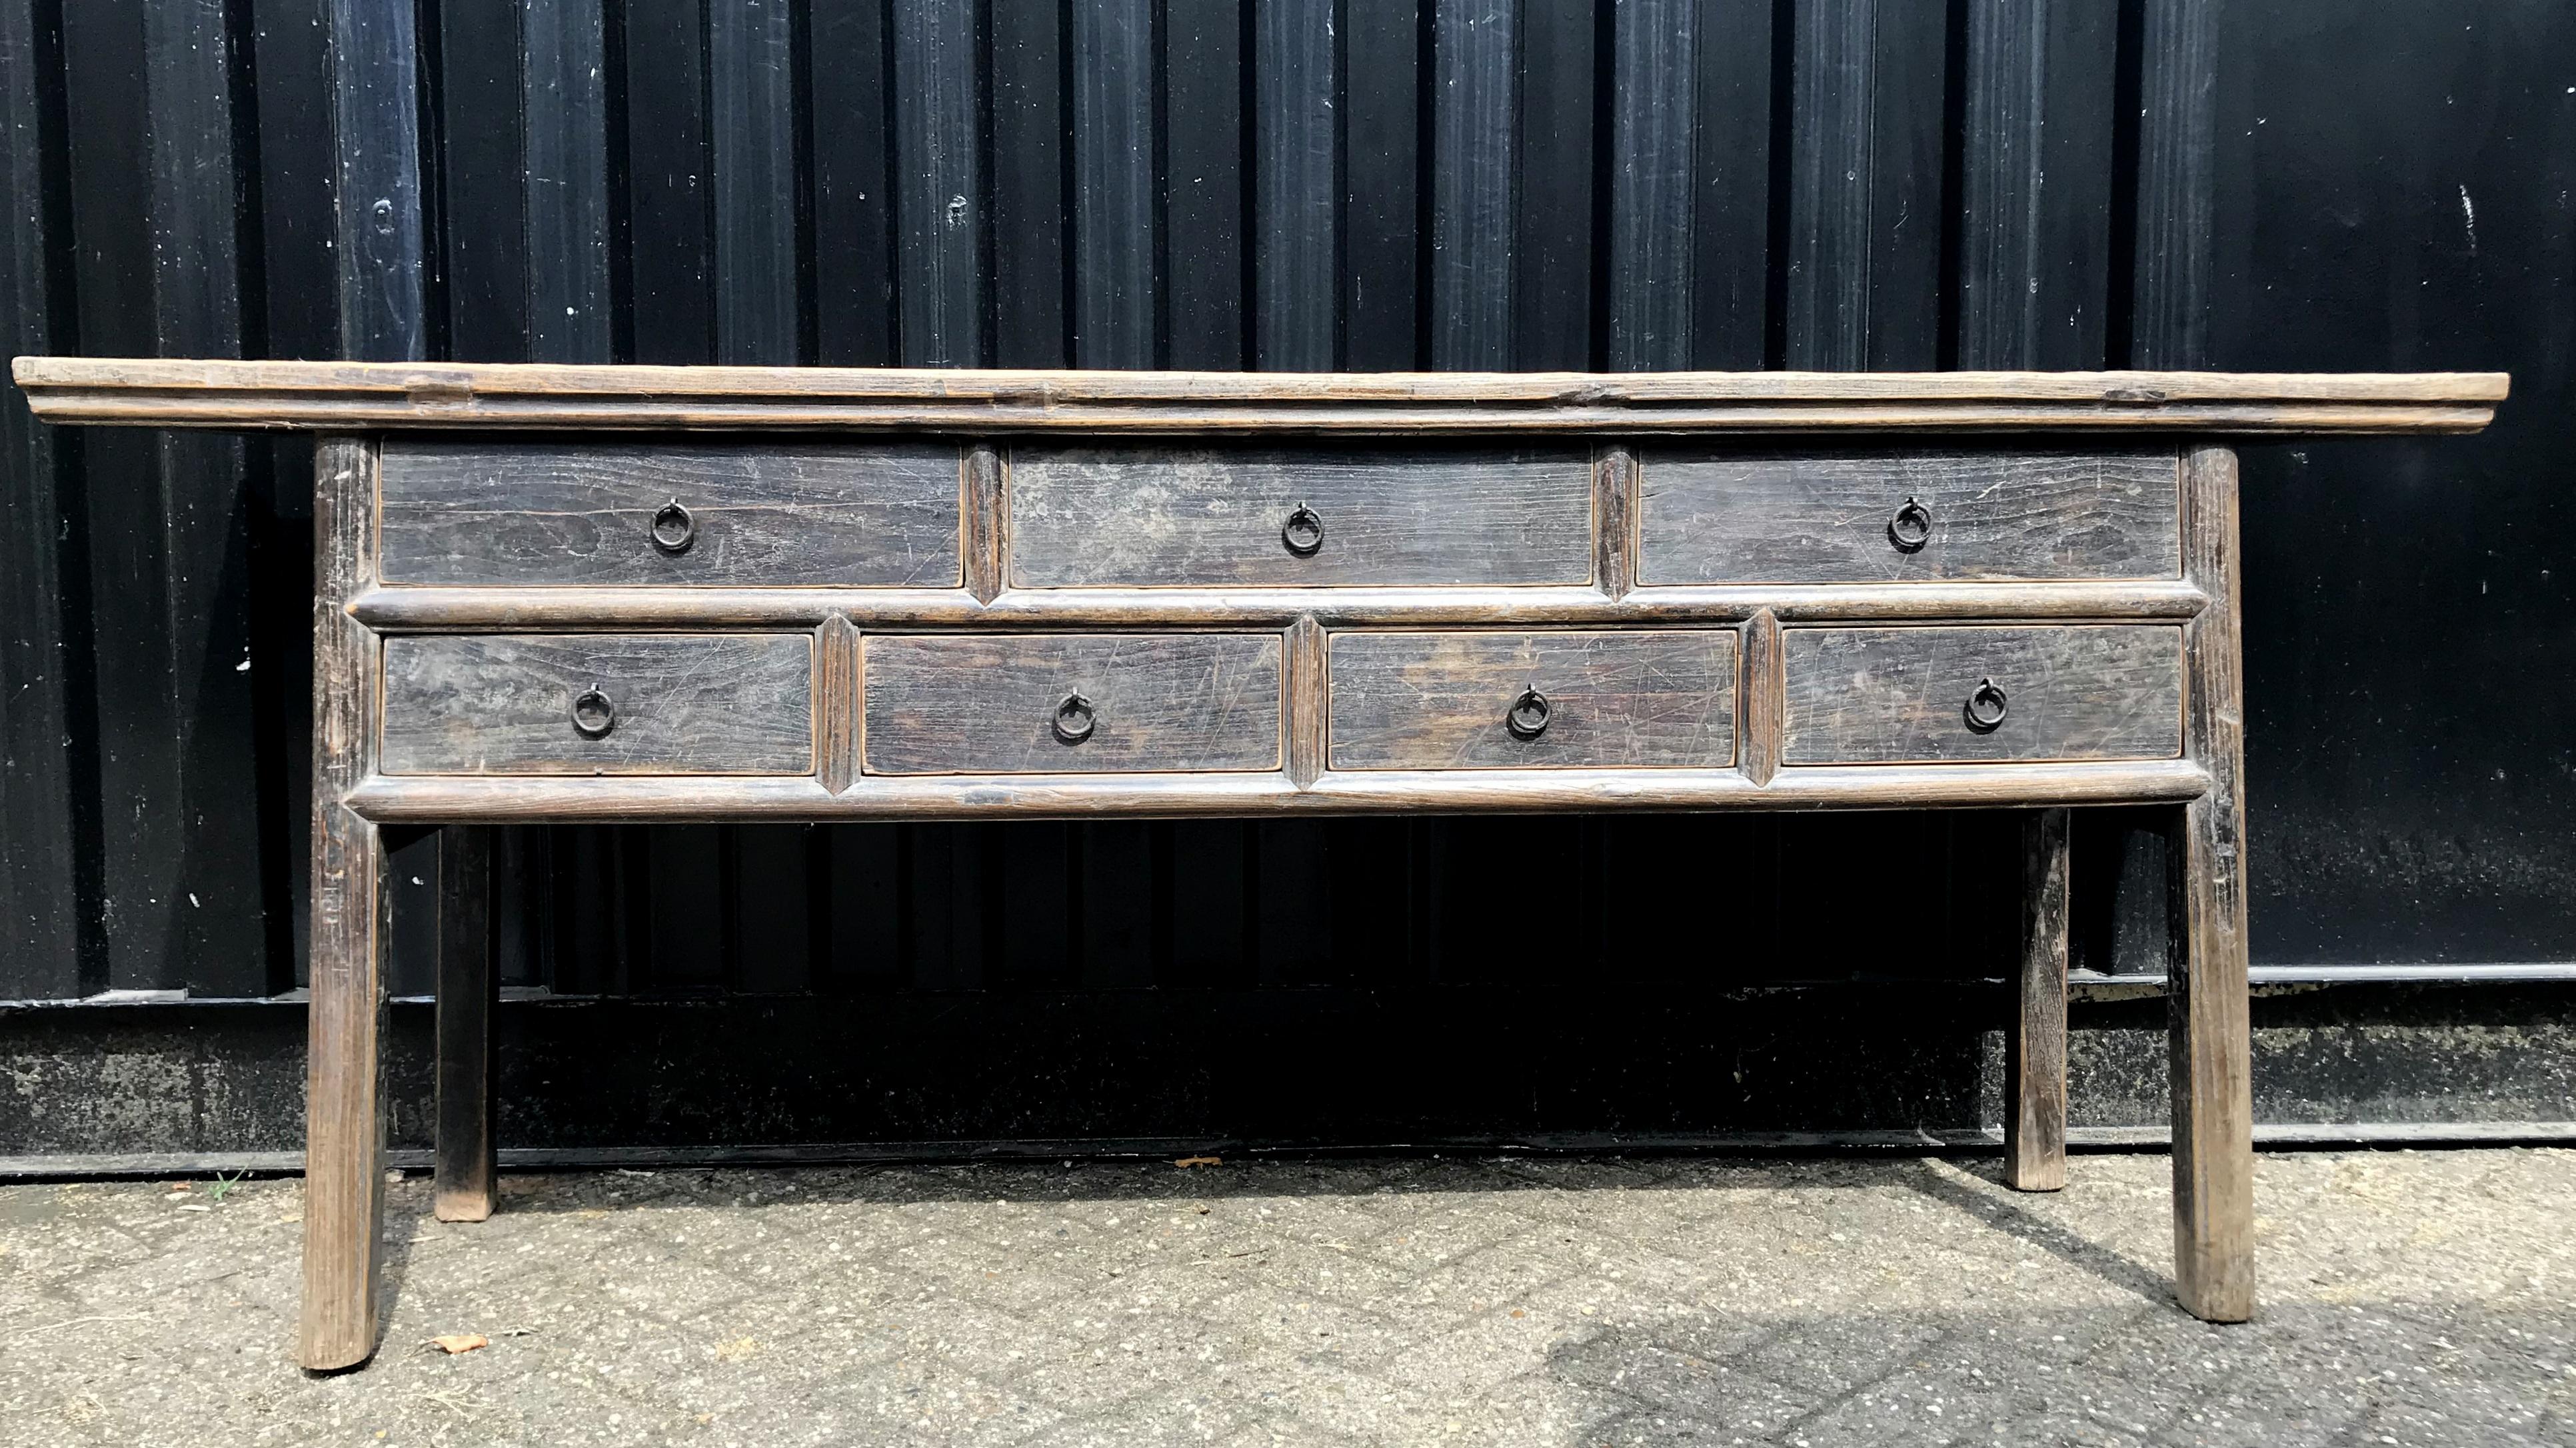 Antique drawer sideboard with dark patina. The sideboard has been completely restored.